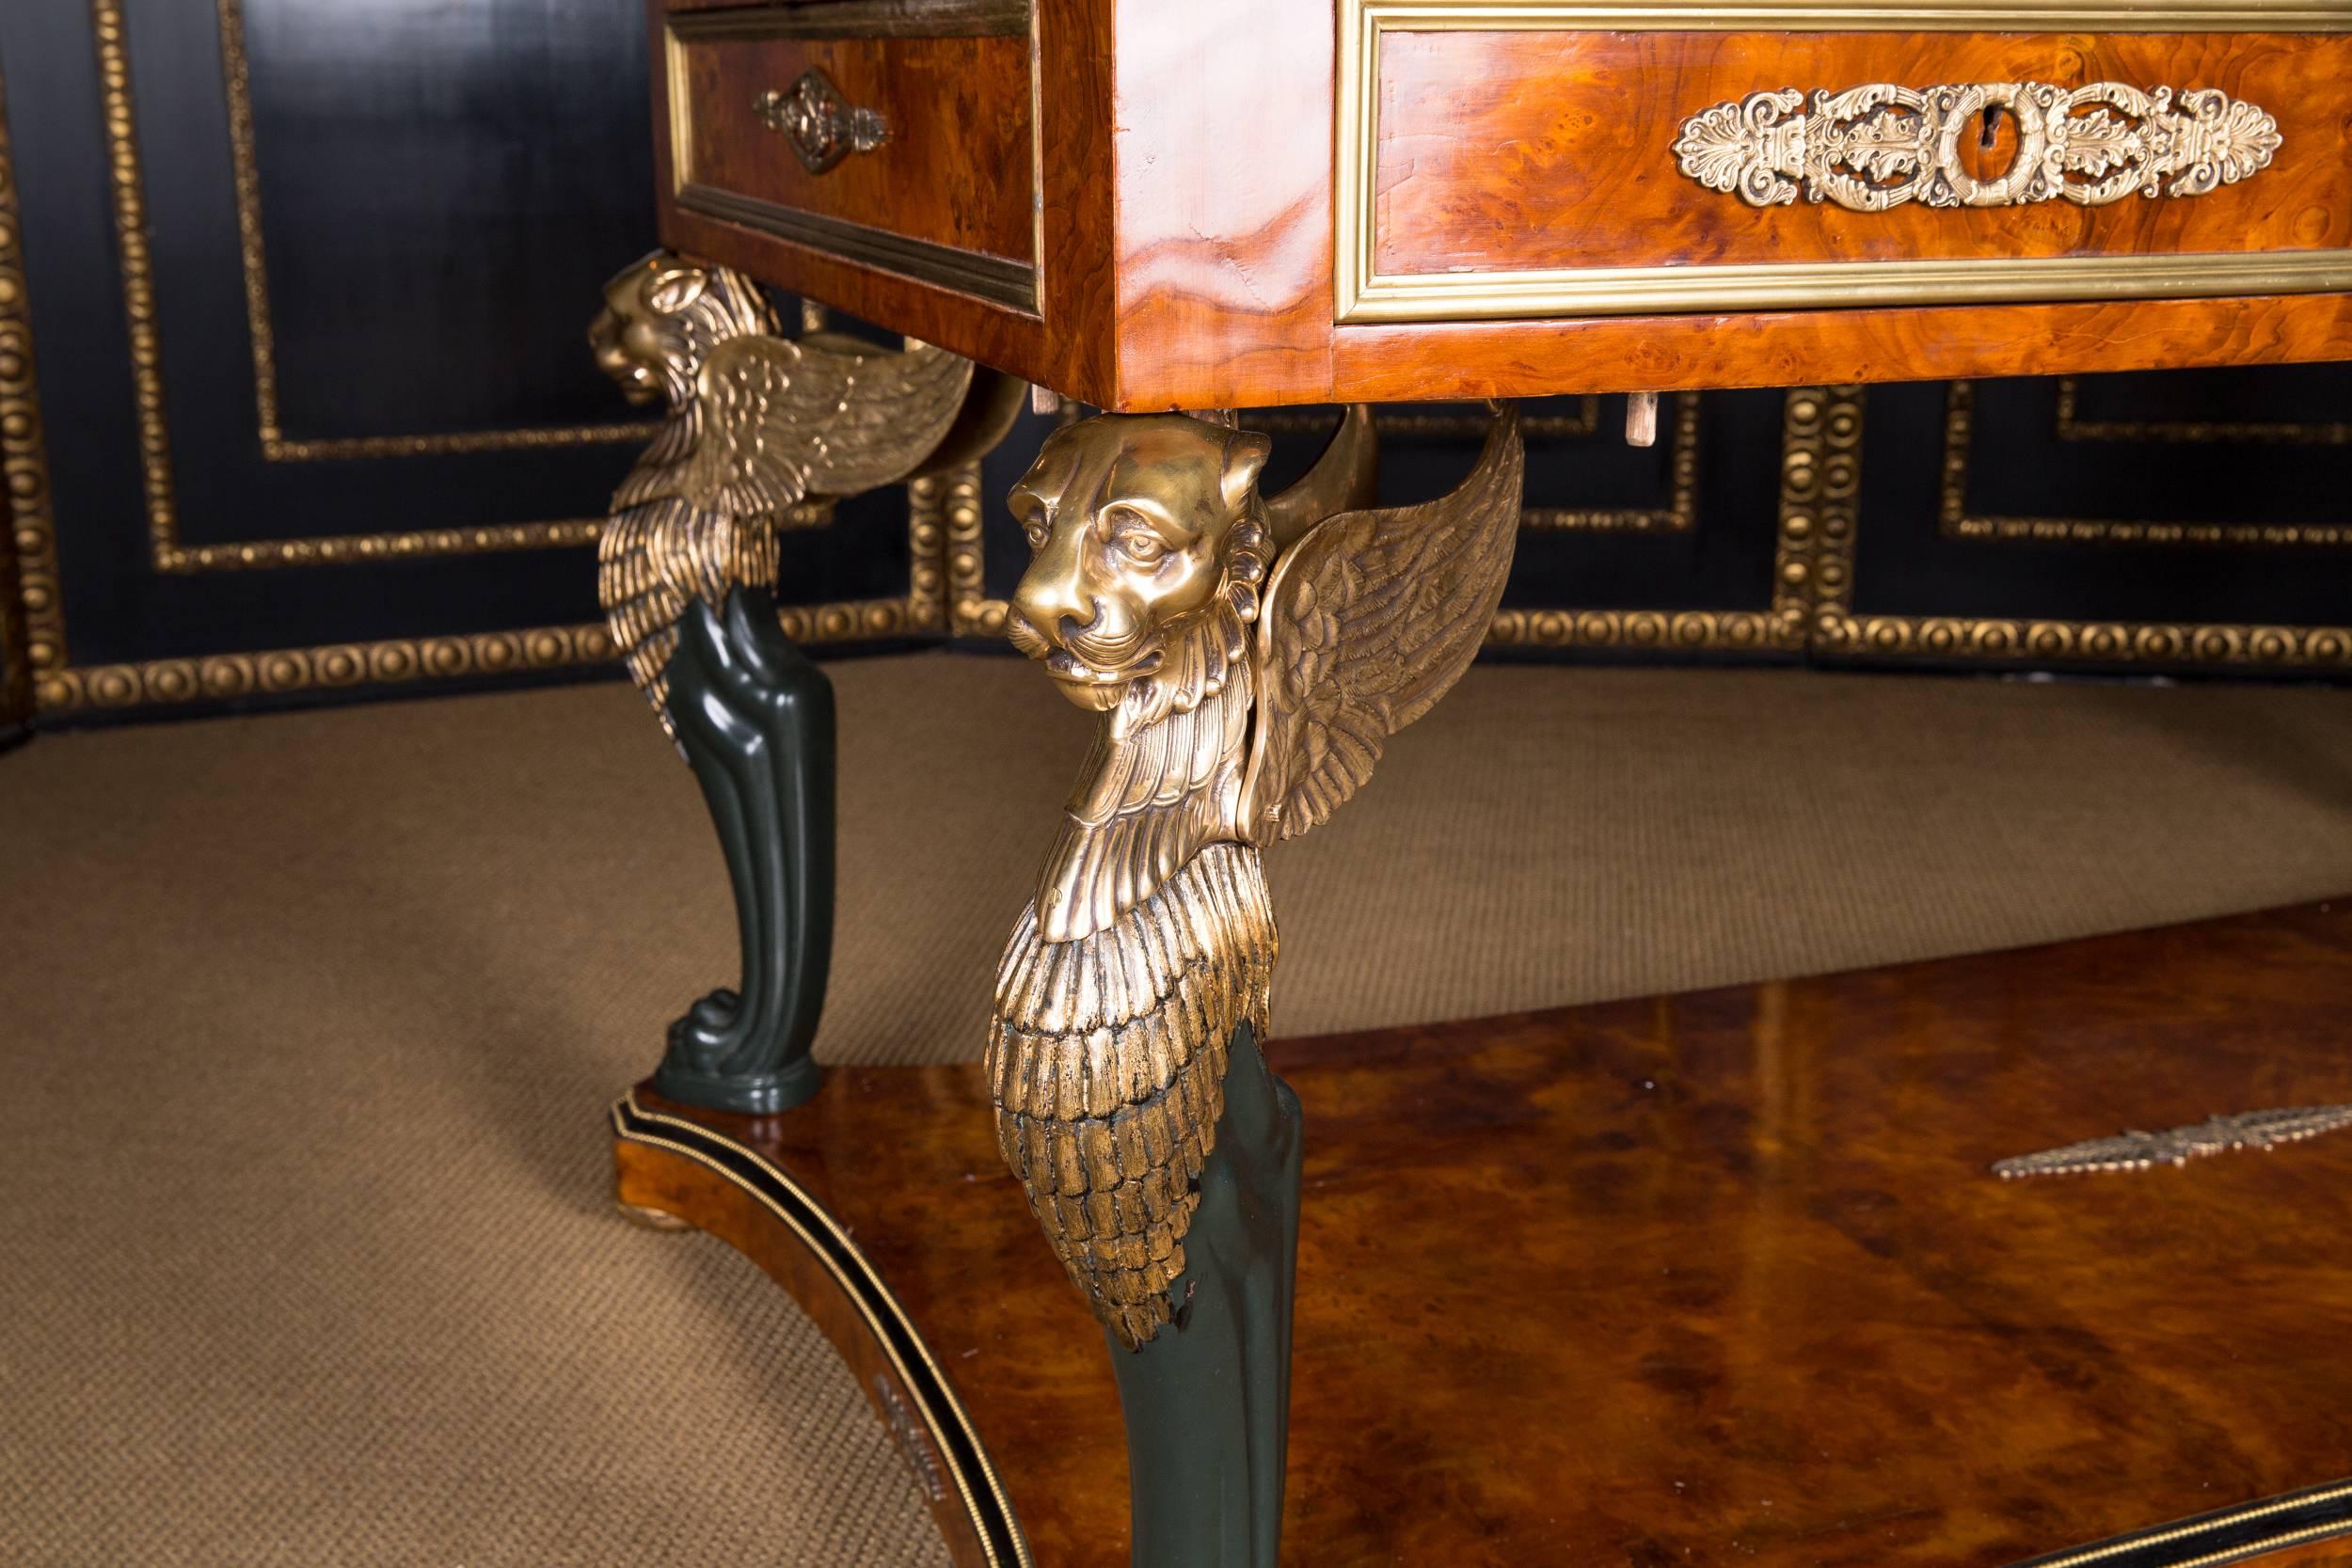 Birdseye Maple 20th Century, French Desk or Bureau Plat with Lions in the antique Empire Style